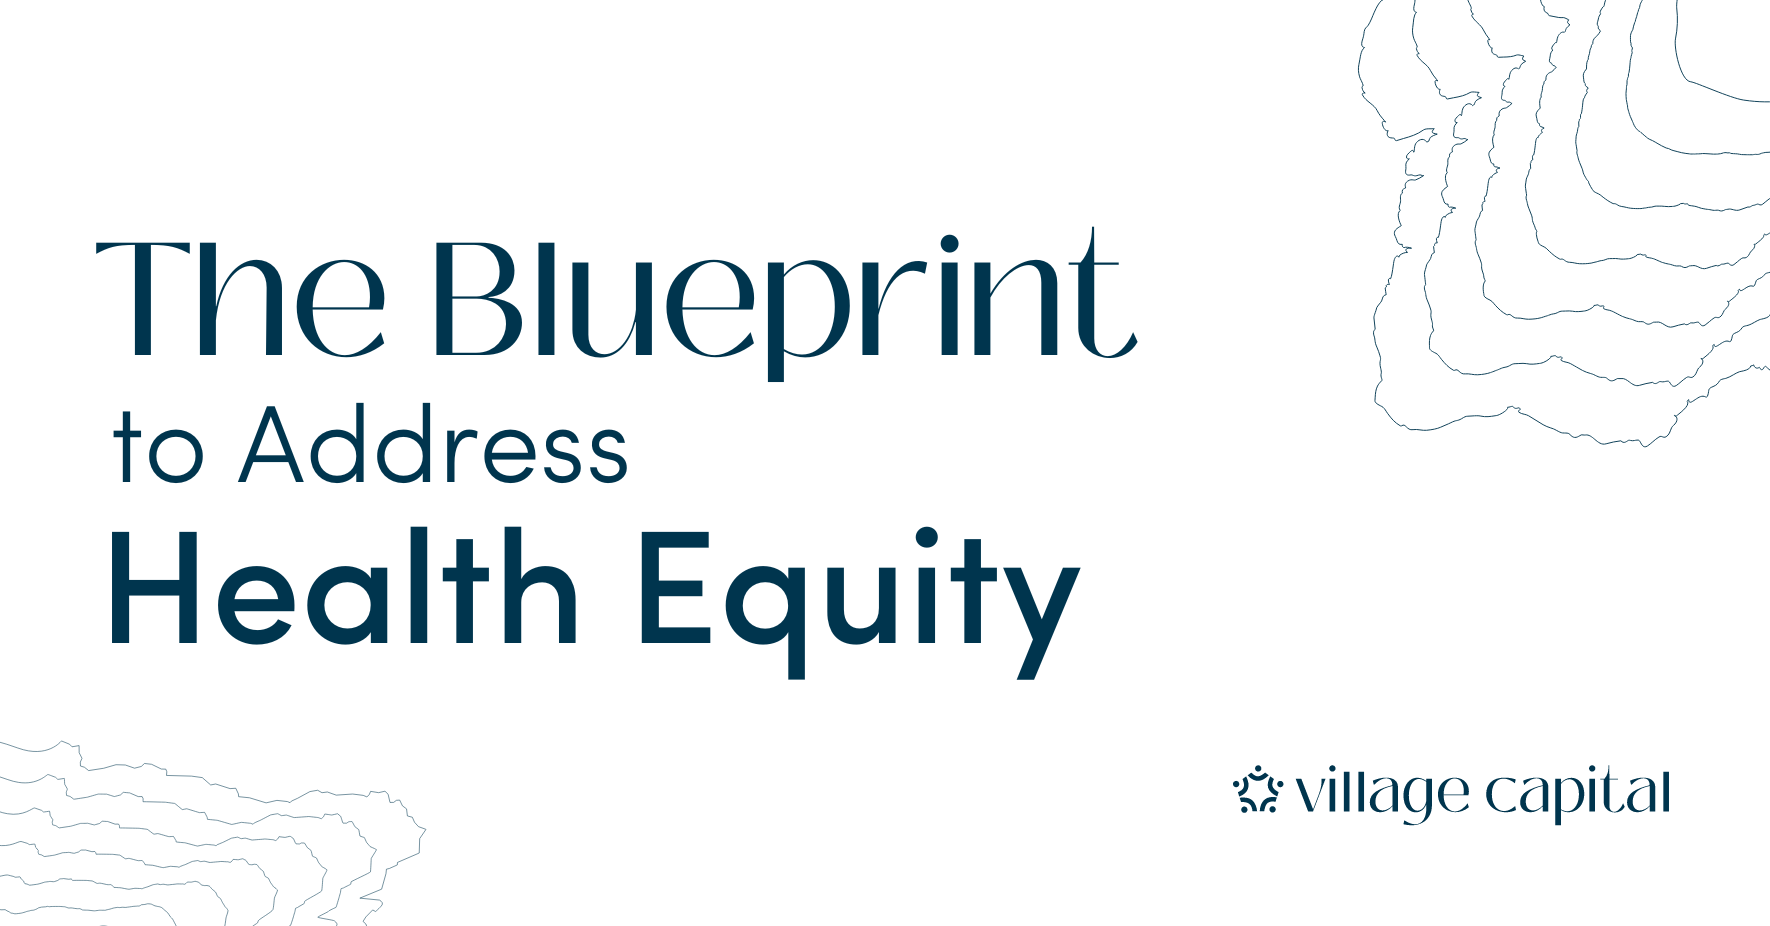 The Blueprint to Address Health Equity